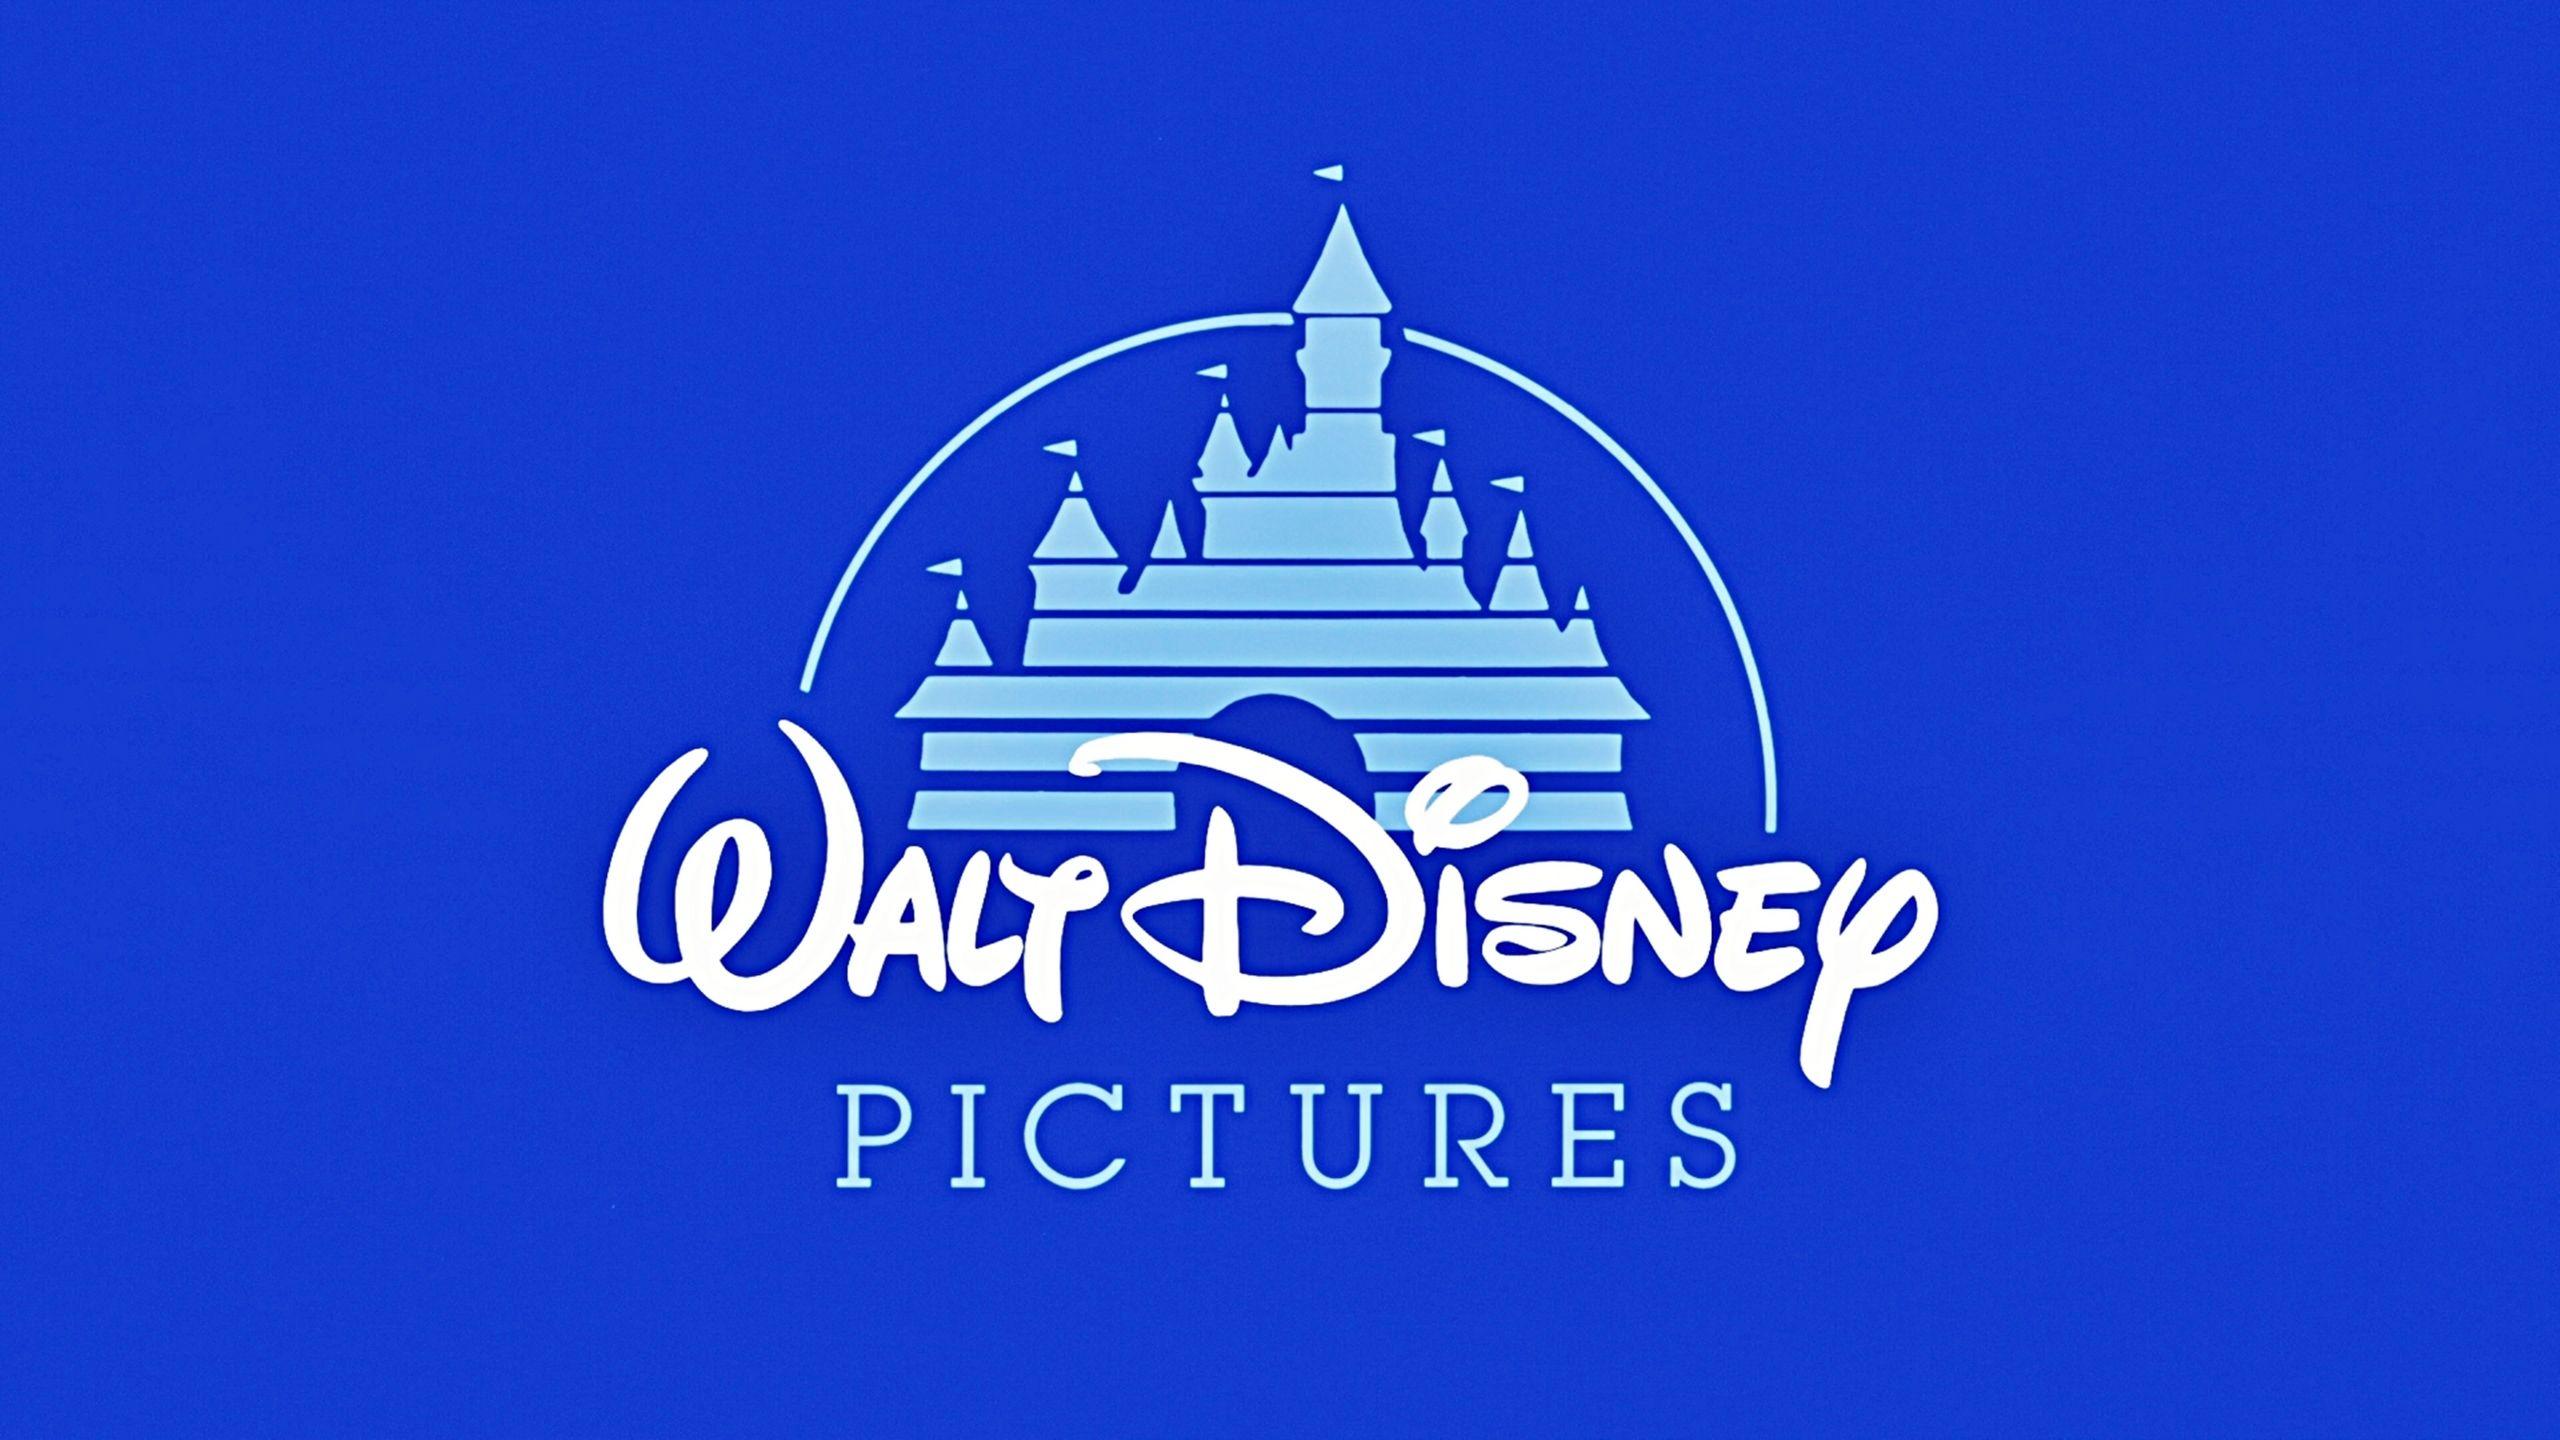 Disney Movie 2017 Logo - Bleeding Cool Shares the Disney Movies That Influenced Us the Most